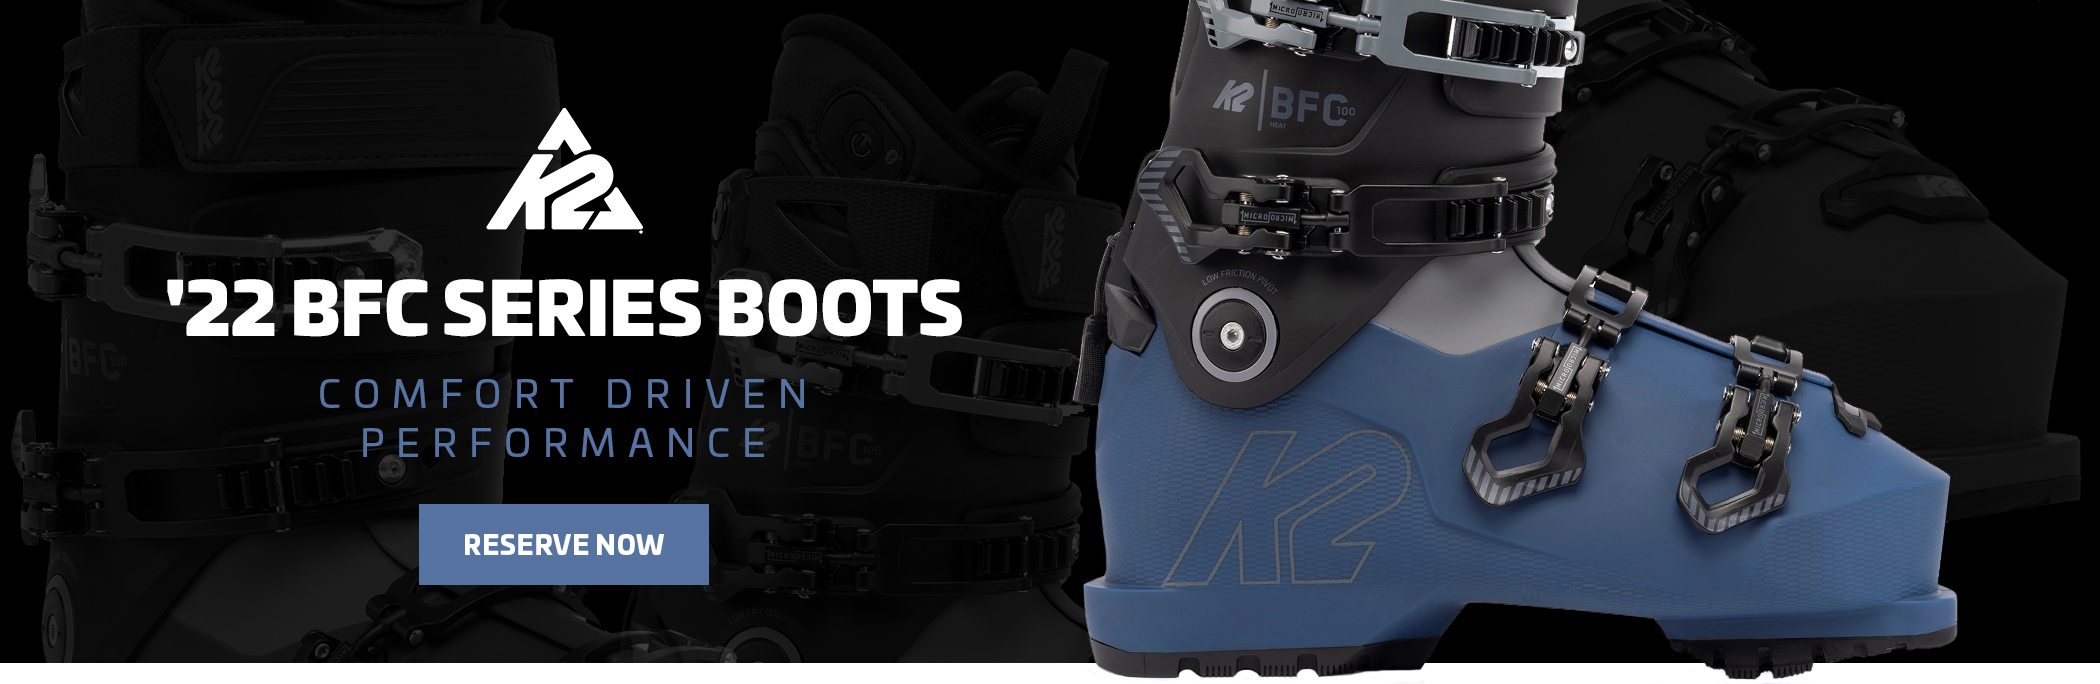 K2 '22 BFC SERIES BOOTS